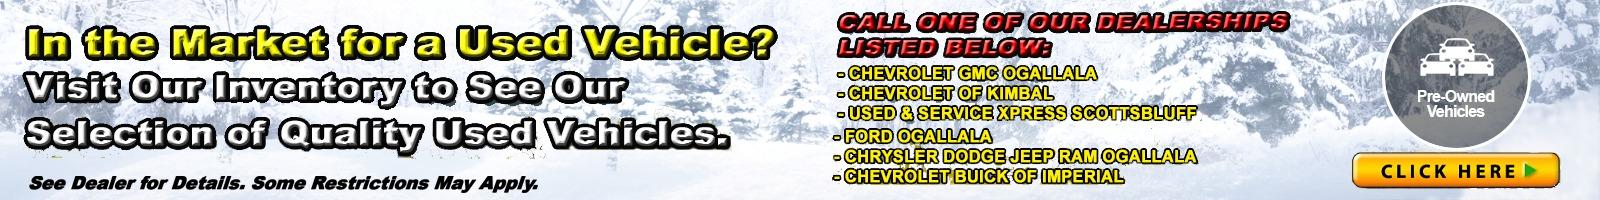 In the market for a used vehicle? Visit our inventory to see our selection of quality used vehicles. See dealer for details. Some restrictions may apply
CHEVROLET GMC OGALLALA (308) 284-6090 CHEVROLET OF KIMBALL (308) 235-3697USED & SERVICE XPRESS SCOTTSBLUFF (308) 635-9653FORD OGALLALA (308) 284-2001CHRYSLER DODGE JEEP RAM OGALLALA (308) 284-6090CHEVROLET BUICK OF IMPERIAL (308) 882-4295 WOLF FORD OF ALLIANCE (800) 424-1076